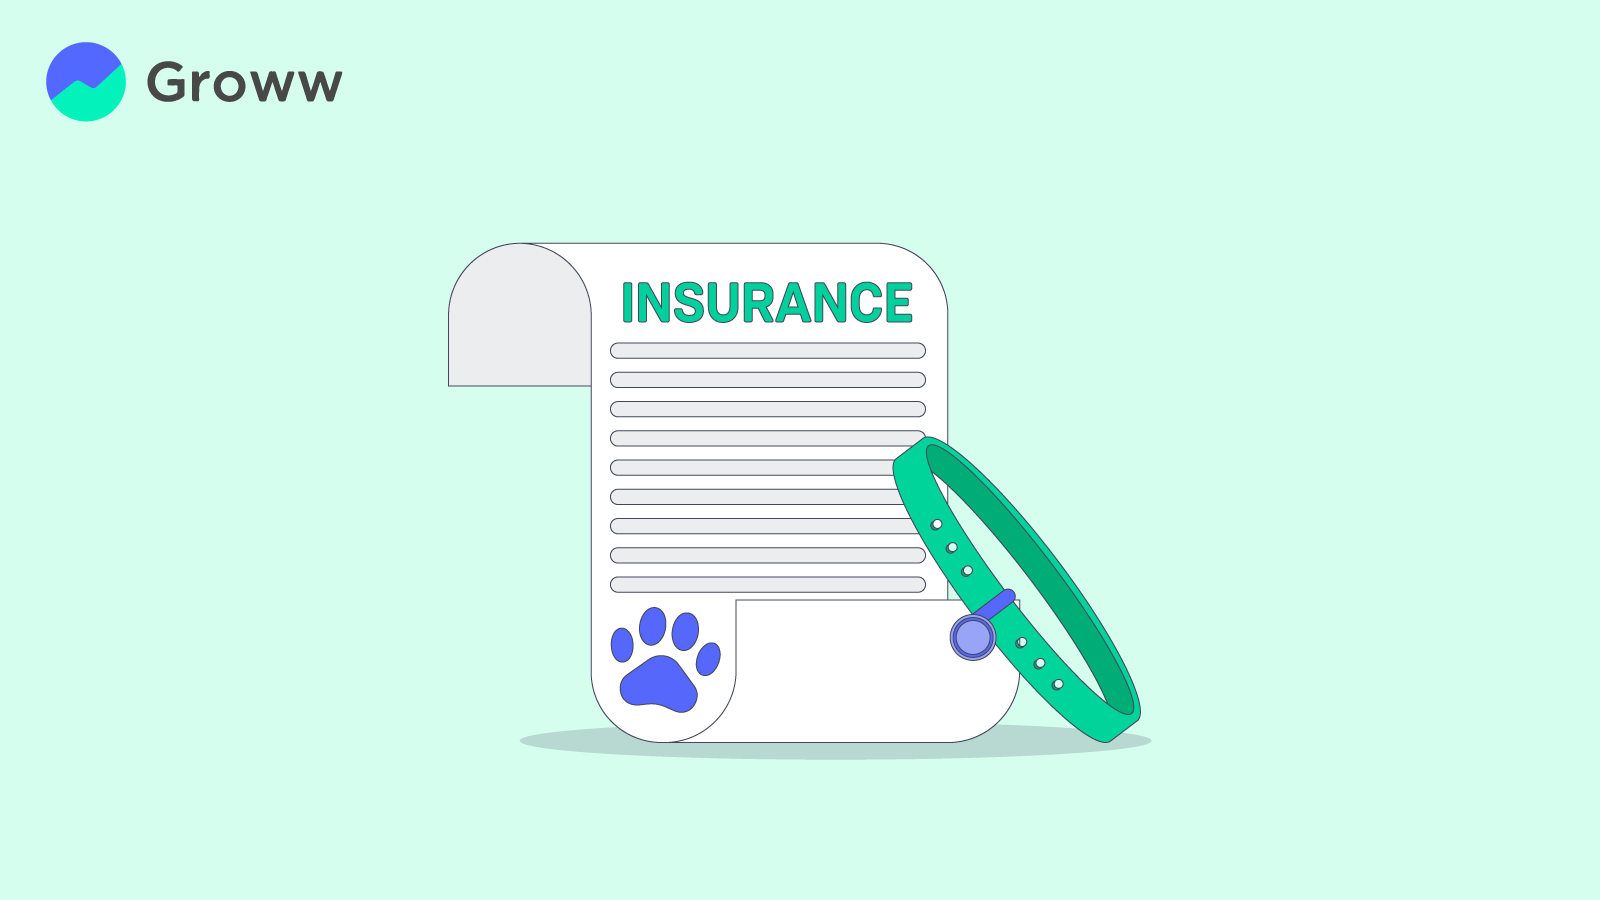 Best Pet Insurance Policies in India